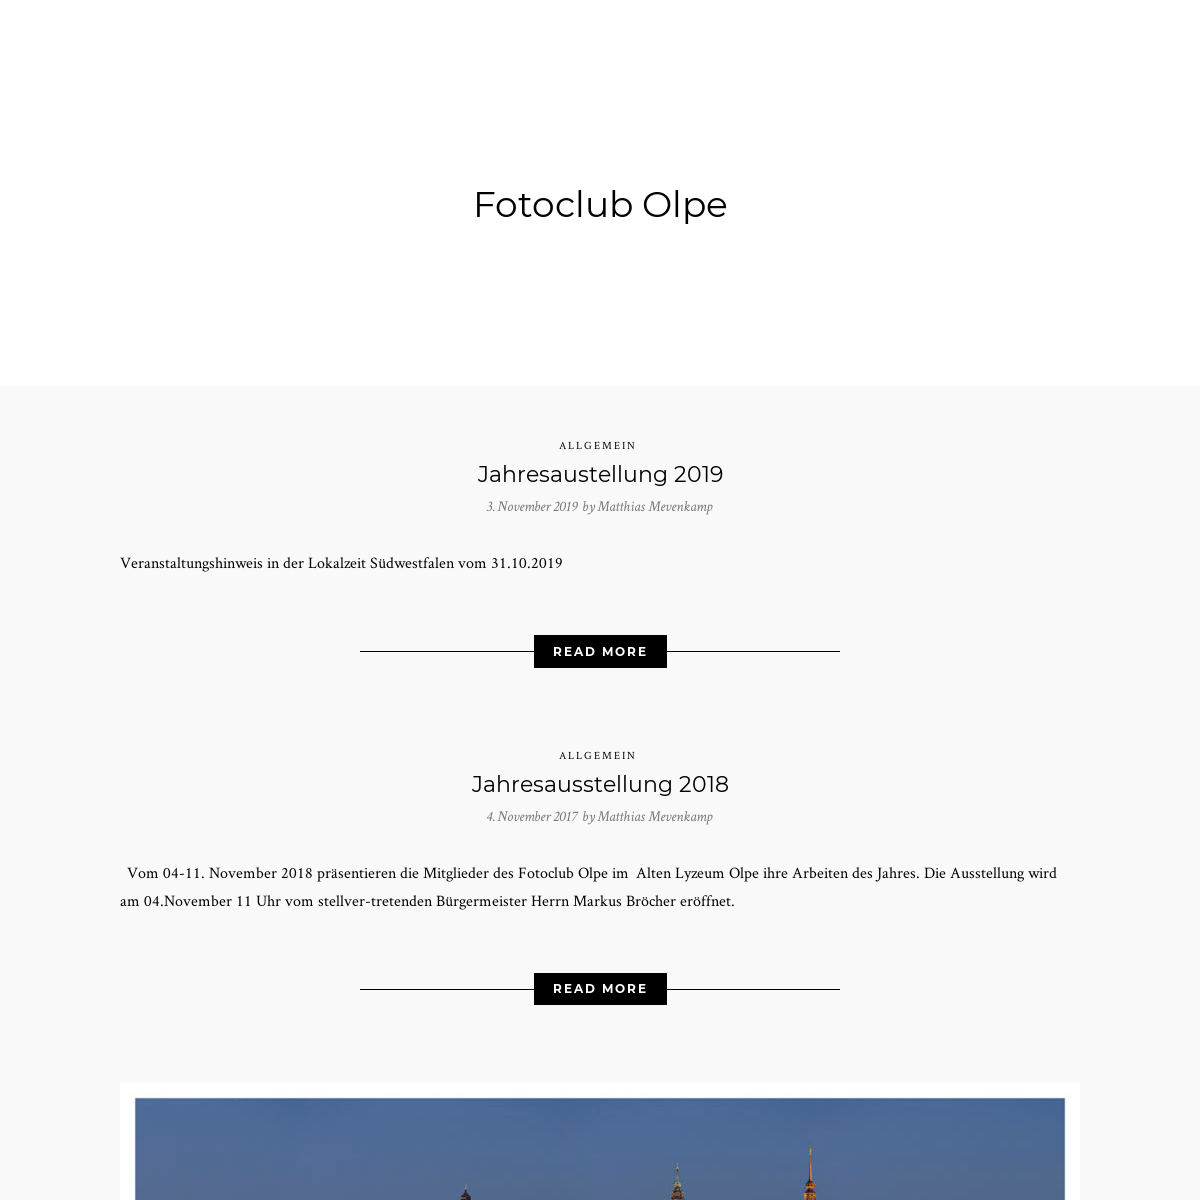 A complete backup of fotoclub-olpe.de